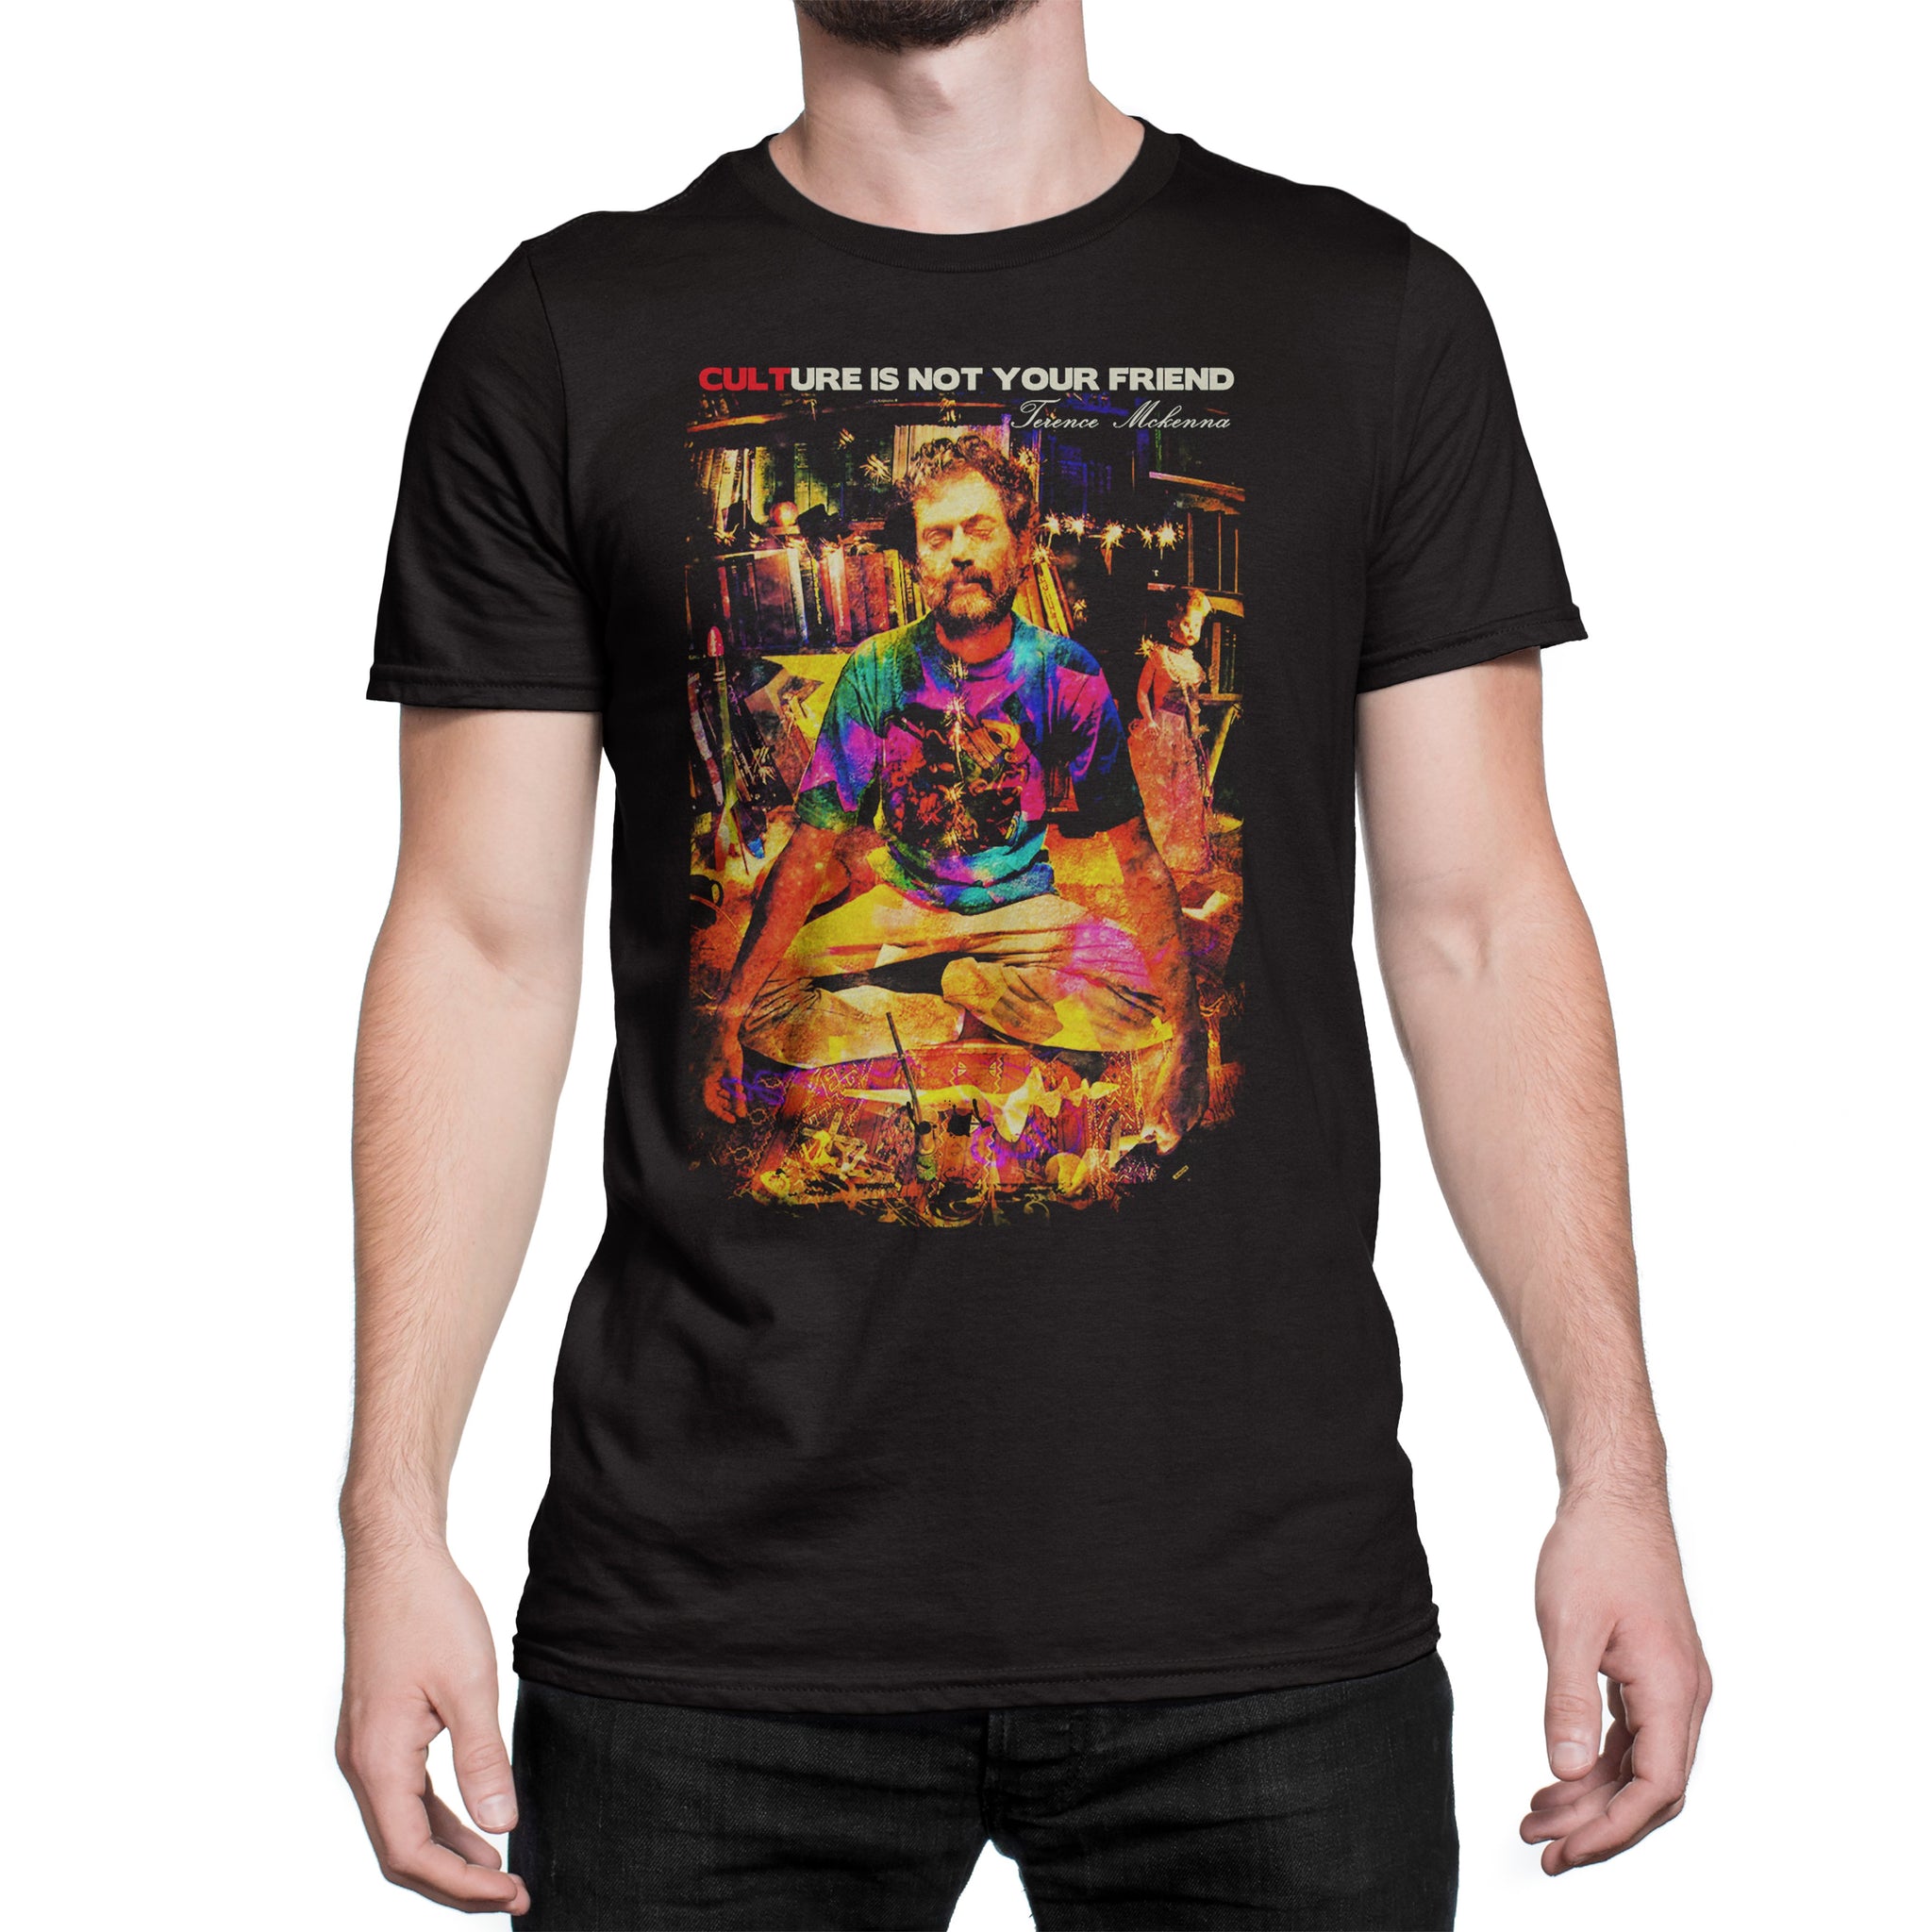 Terence Mckenna "CULTure" Tee